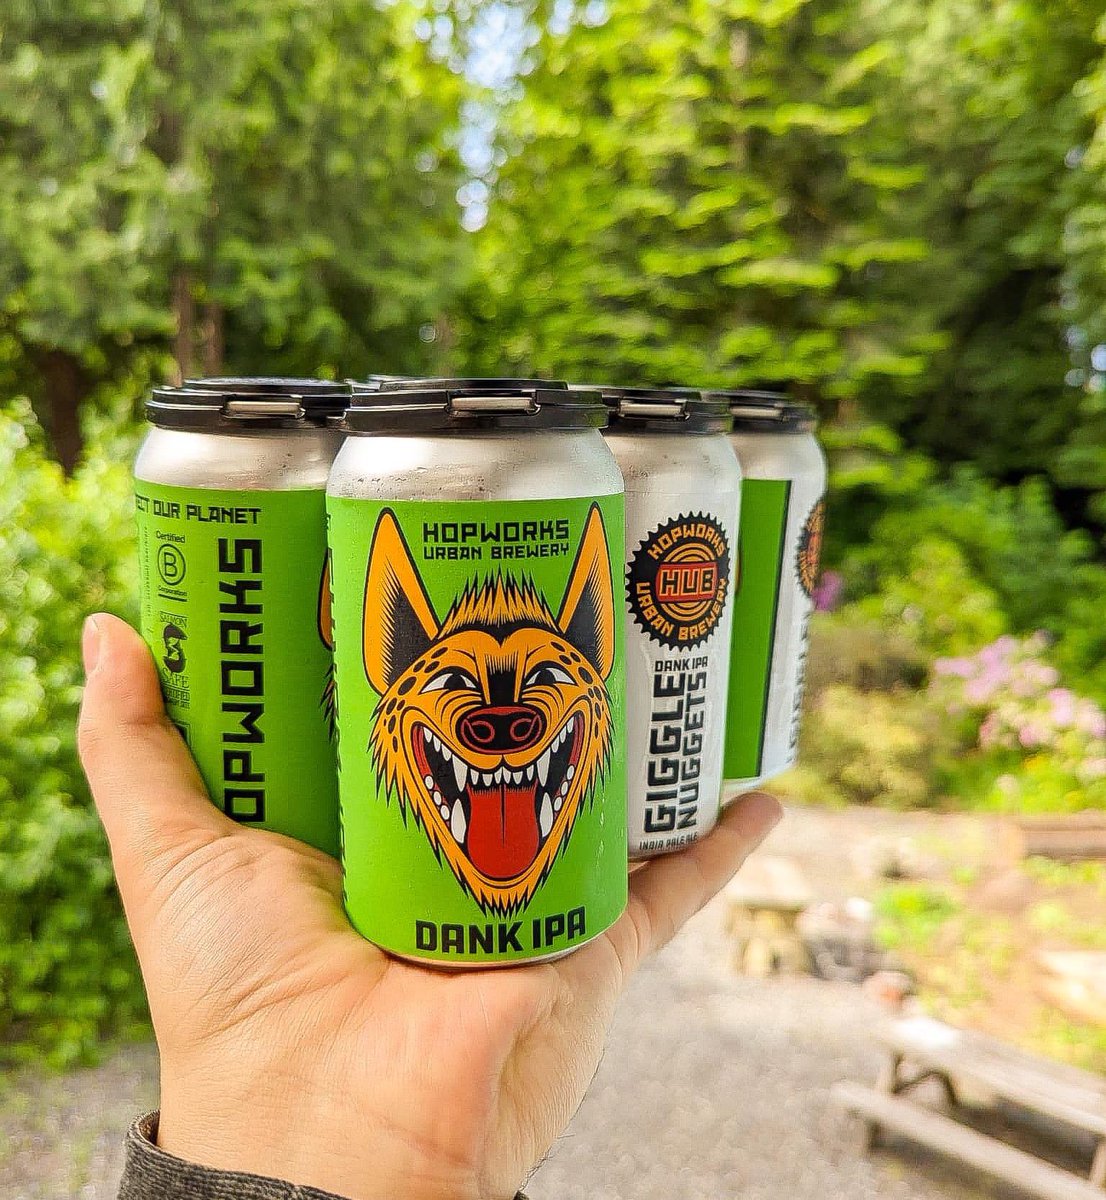 Get a huff of that FRESH air while crushing some DANK Giggle Nuggets. Summer days and this Dank IPA were meant for each other. Available in 6-packs at a retailer and local bottle shop near you!